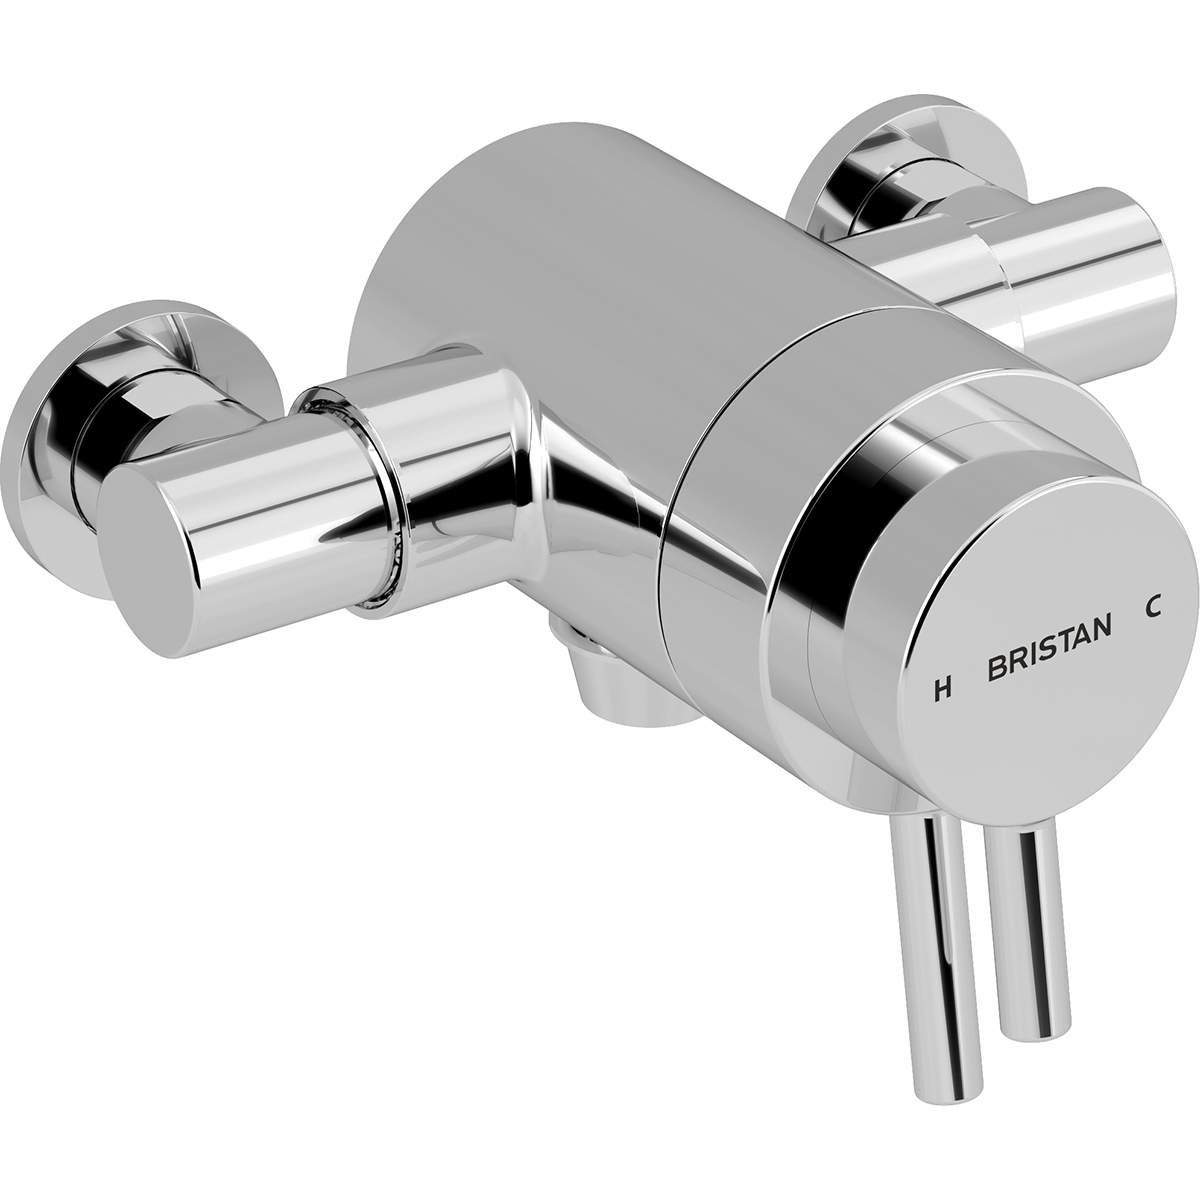 Bristan Prism Exposed Dual Control Shower Valve with Bottom Outlet (PM2 CSHXVO C)